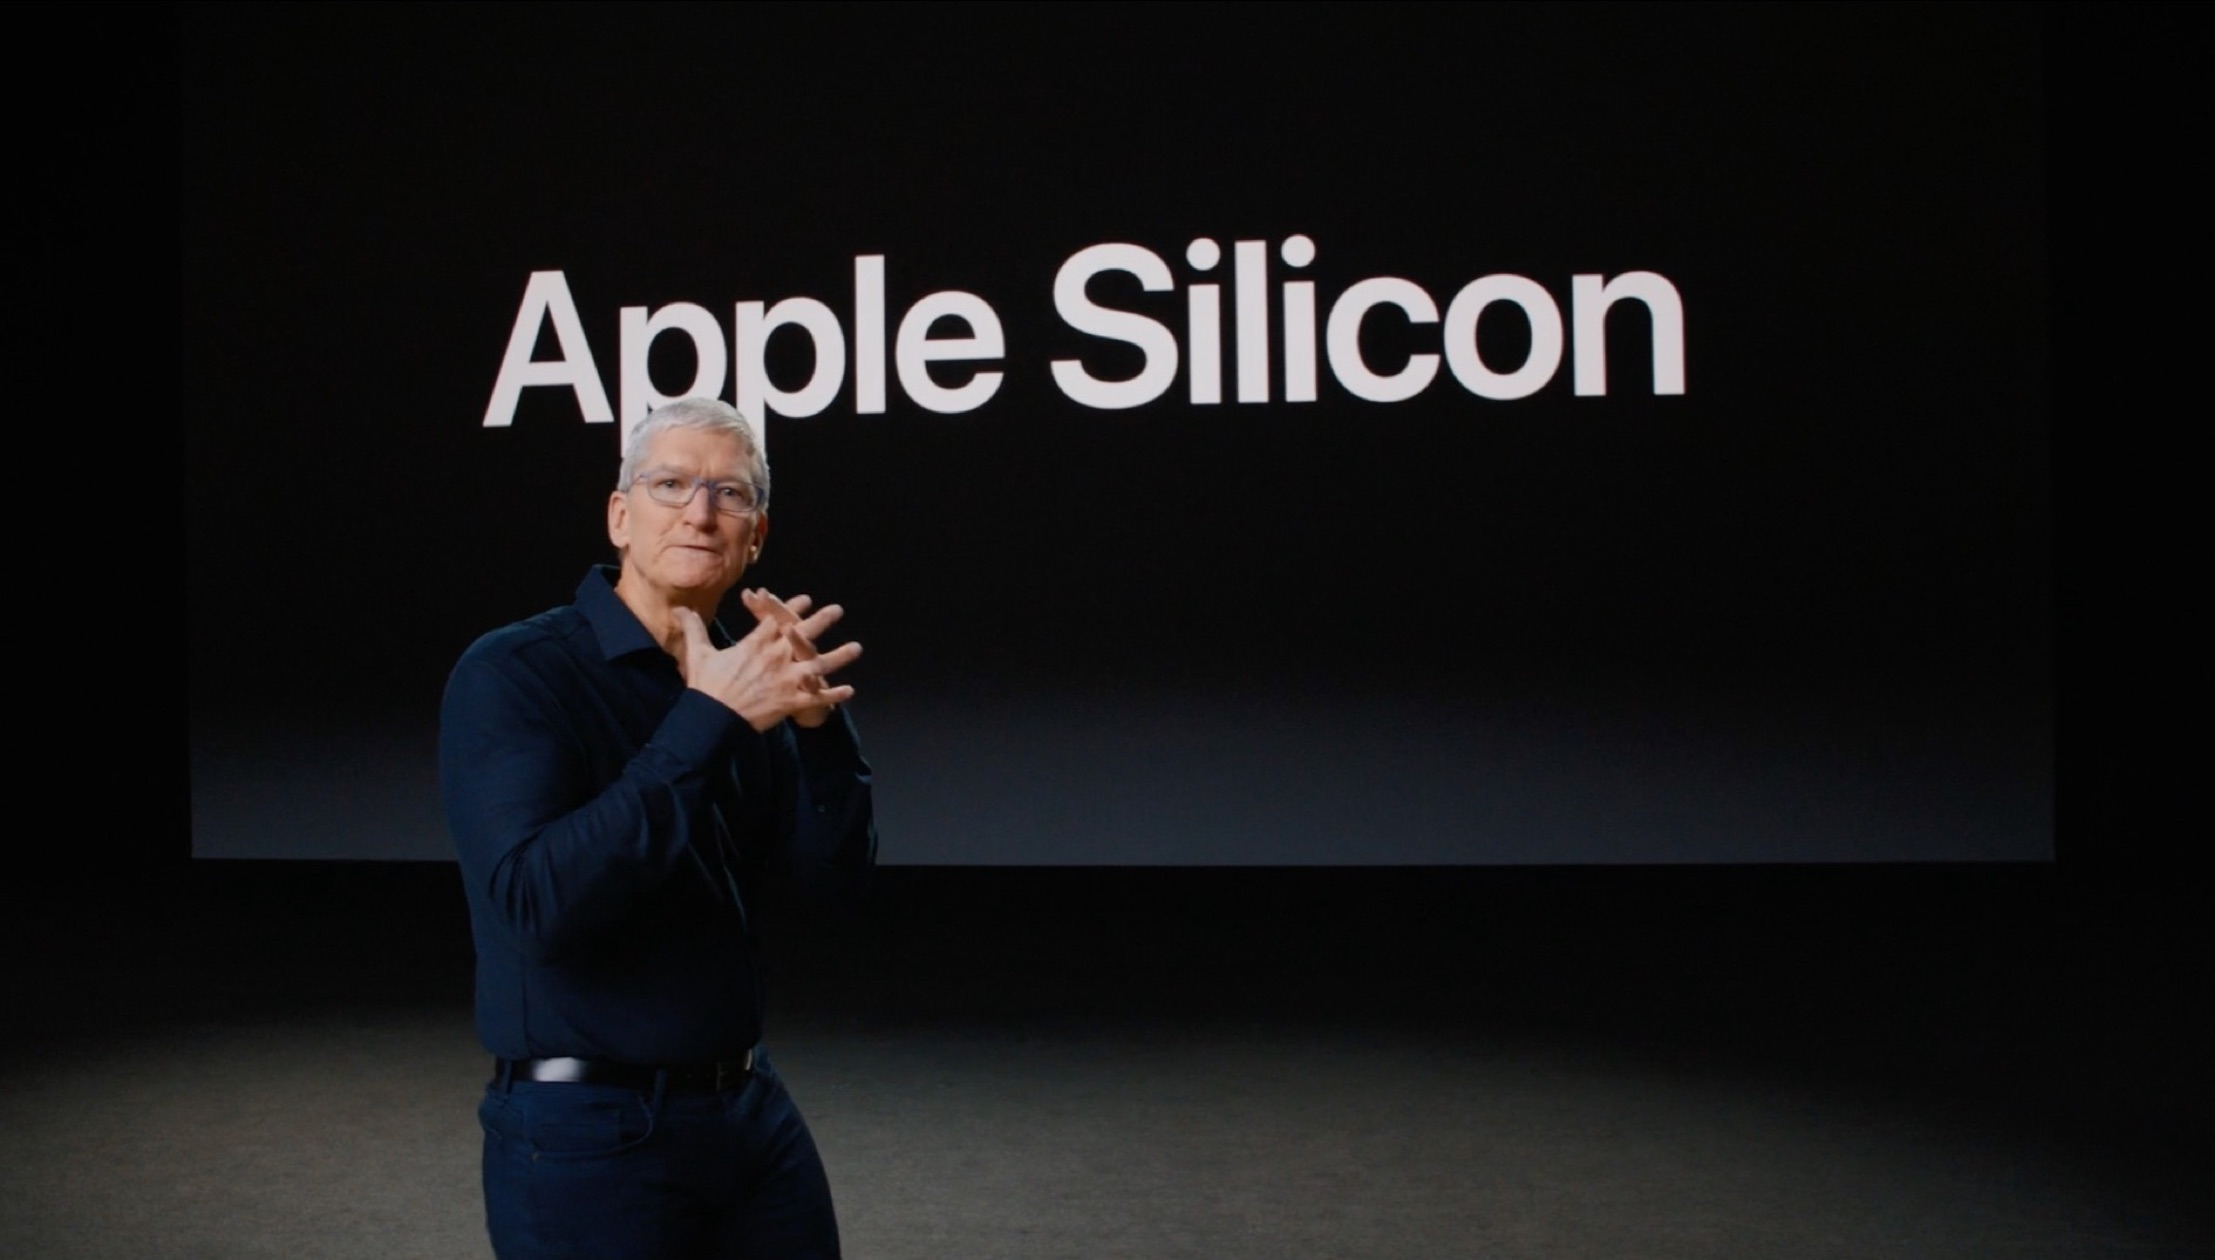 Apple Silicon and Tim Cook